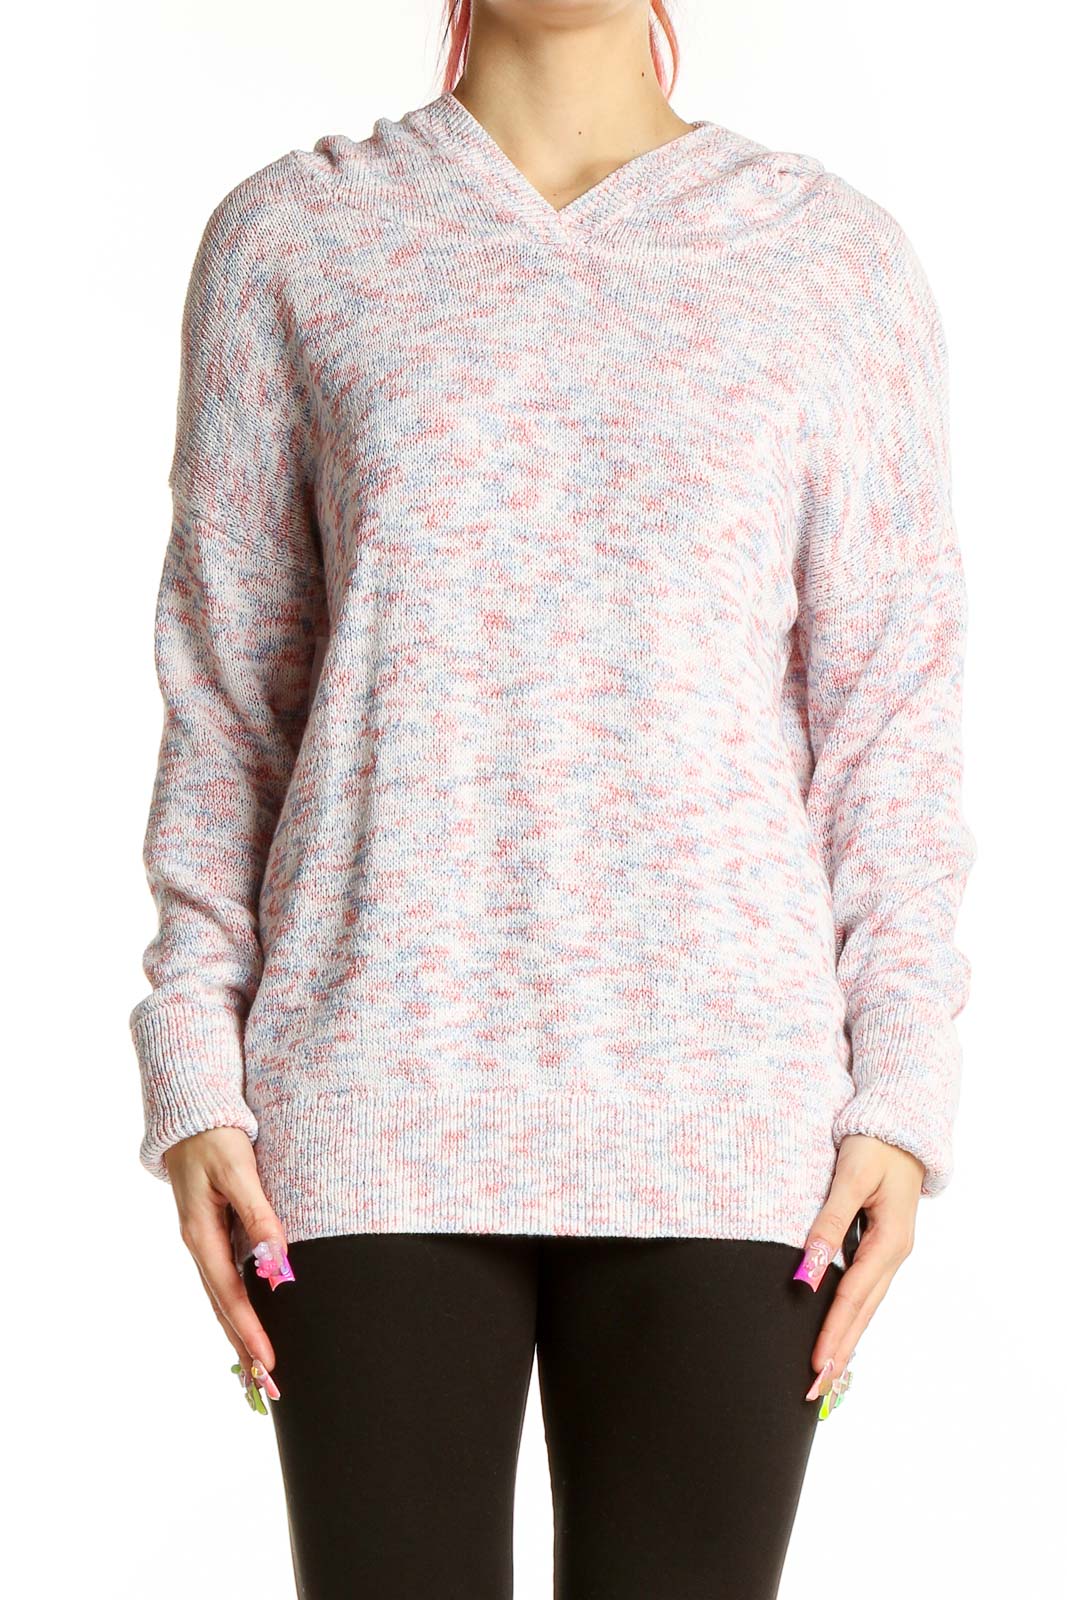 Beige Floral Sweater Front